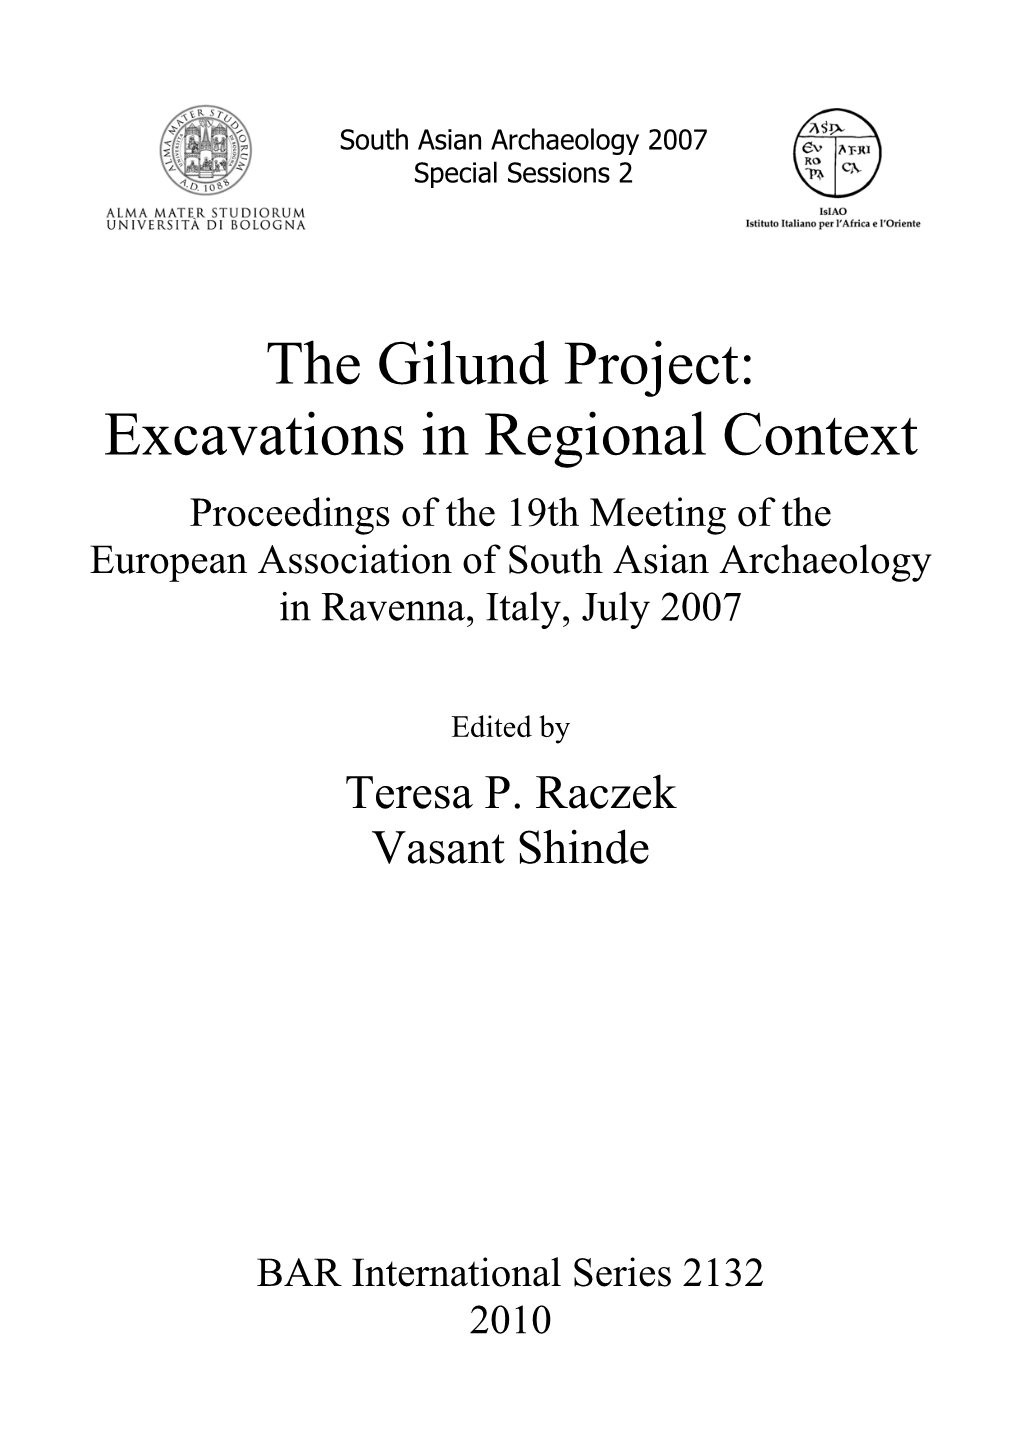 The Gilund Project: Excavations in Regional Context